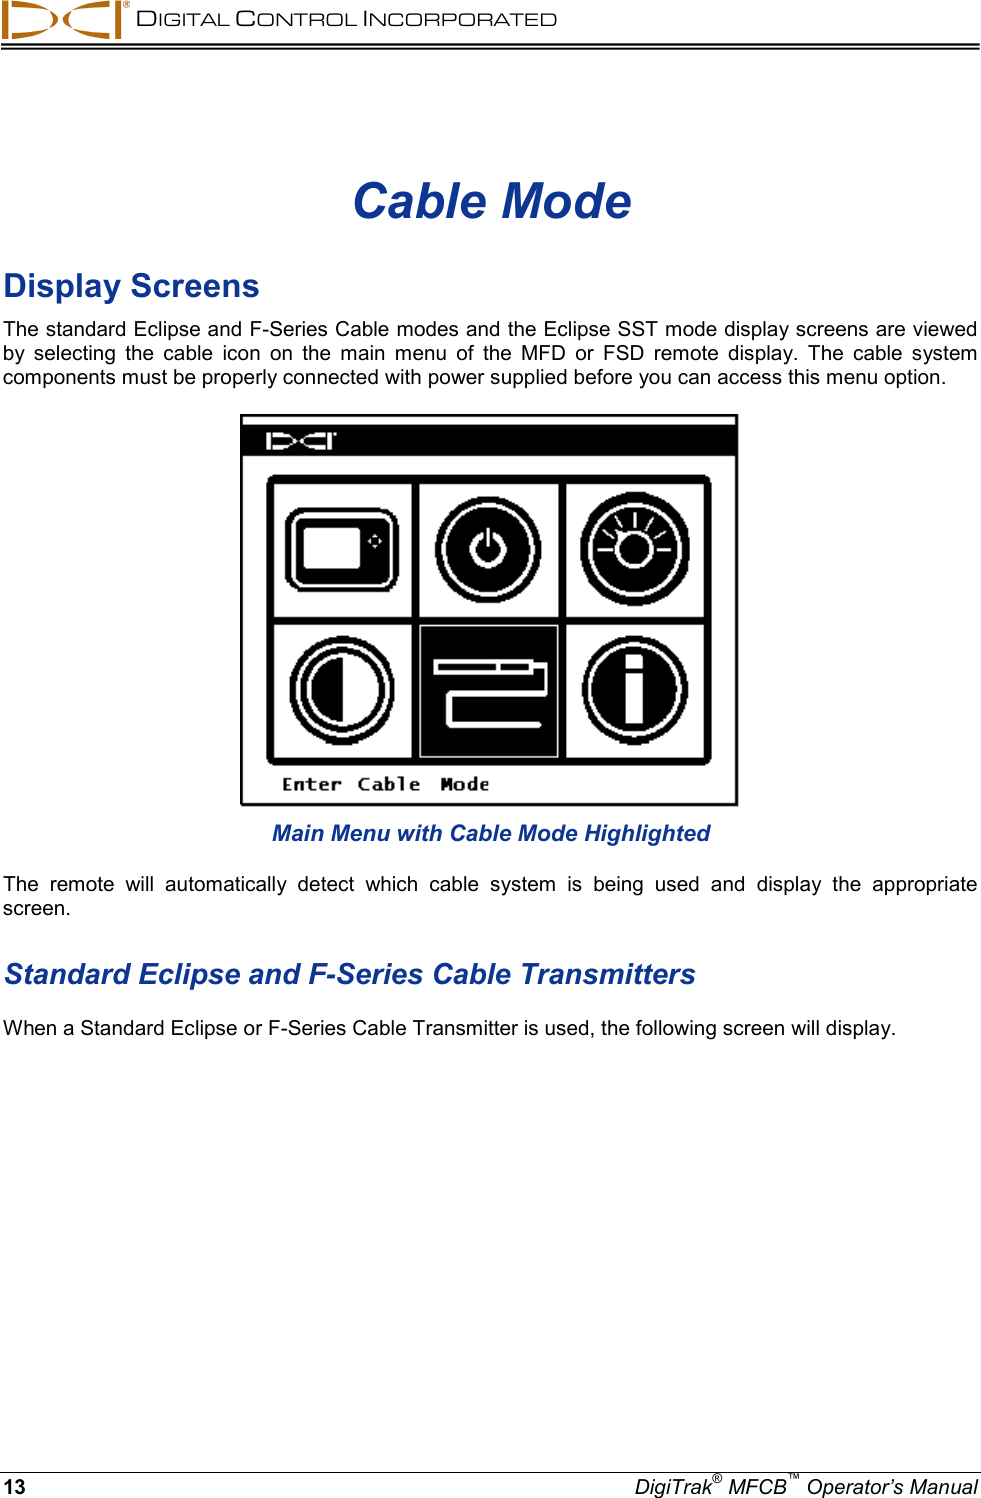  DIGITAL CONTROL INCORPORATED 13 DigiTrak® MFCB™ Operator’s Manual Cable Mode Display Screens The standard Eclipse and F-Series Cable modes and the Eclipse SST mode display screens are viewed by selecting the cable icon on the main menu of the MFD or FSD remote display. The cable system components must be properly connected with power supplied before you can access this menu option.    Main Menu with Cable Mode Highlighted The remote will automatically detect which cable system is being used and display the appropriate screen.   Standard Eclipse and F-Series Cable Transmitters When a Standard Eclipse or F-Series Cable Transmitter is used, the following screen will display. 